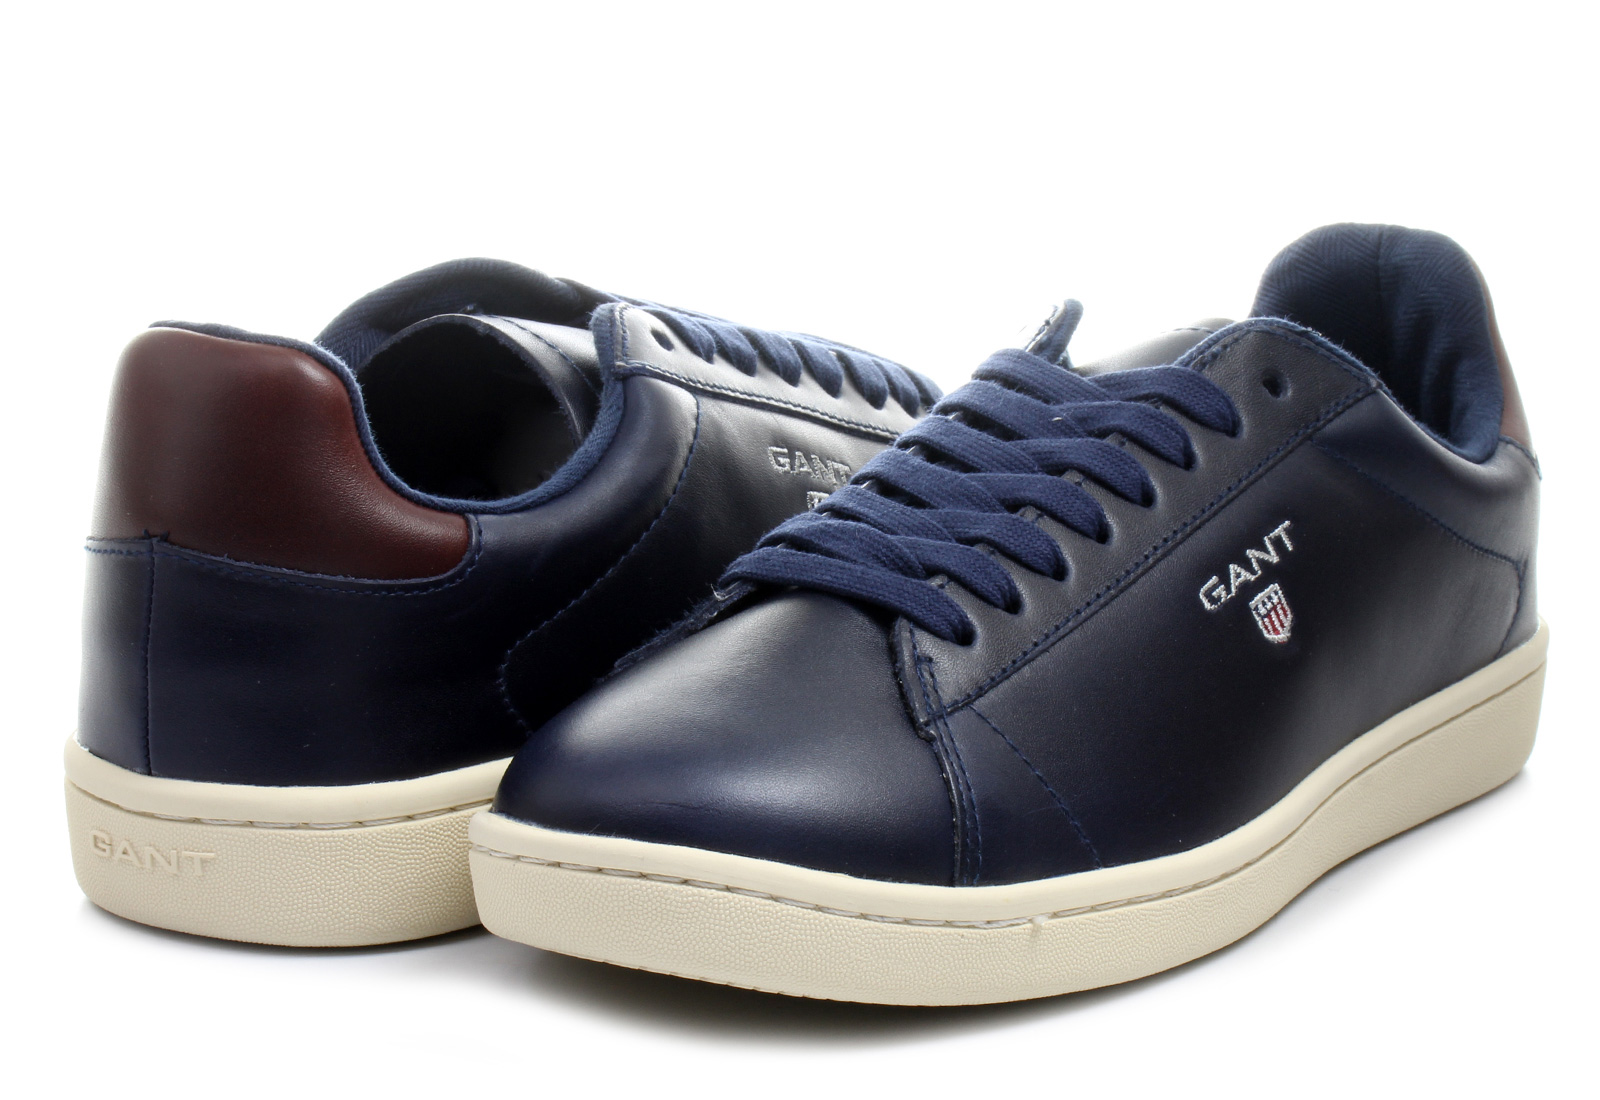 Gant Shoes - Ace - 11631818-G65 - Online shop for sneakers, shoes and boots